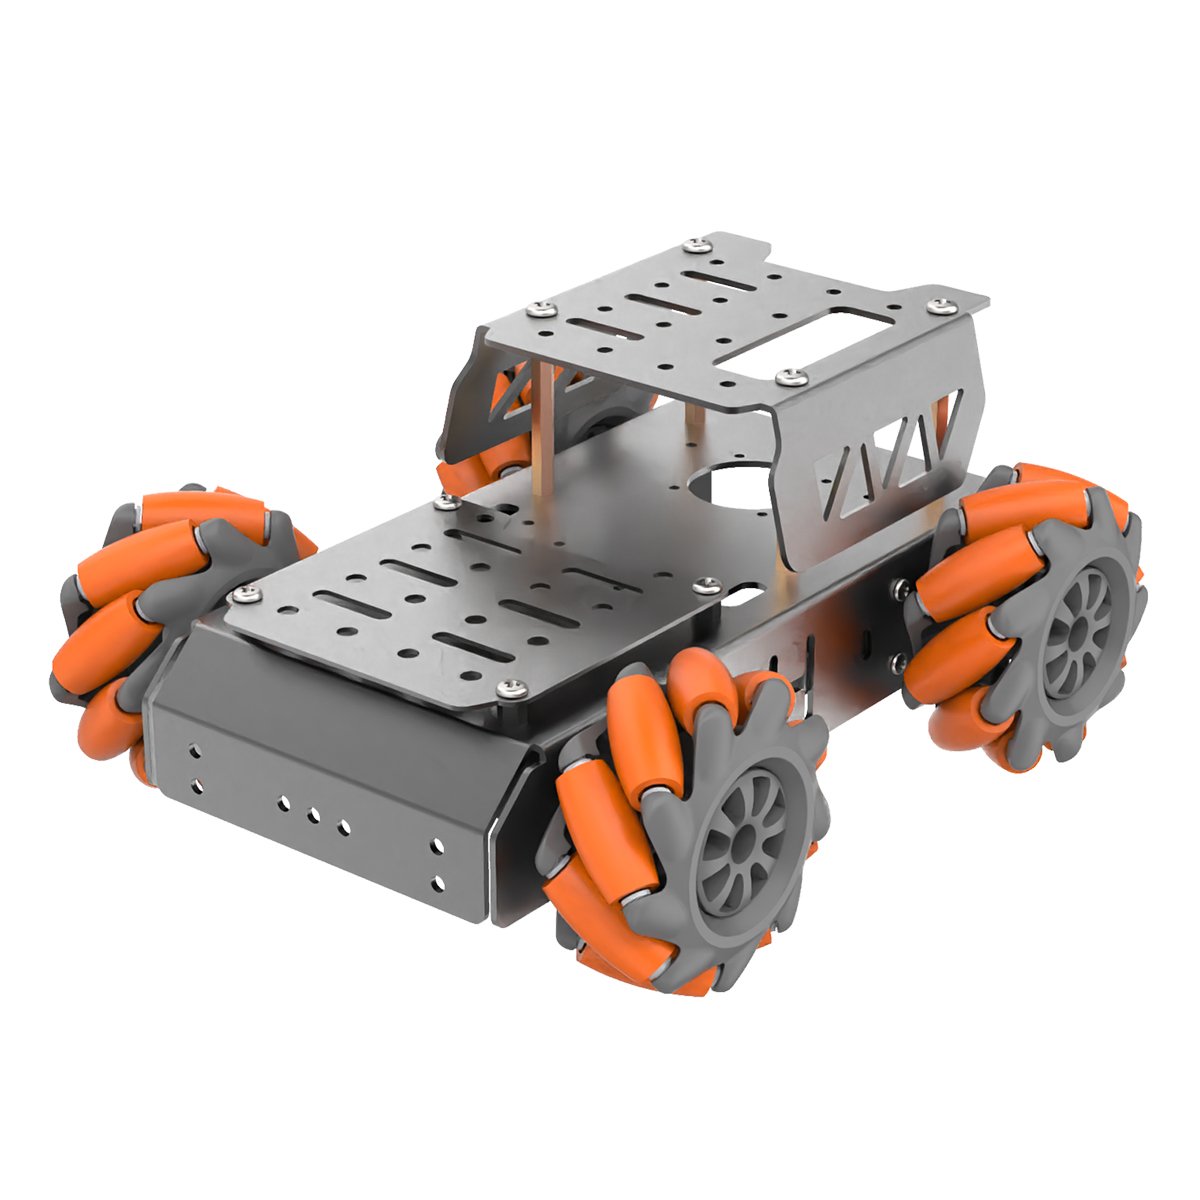 4WD Drive Arduino Robot Wheels Frame Aluminum Alloy Chassis DIY KIT 